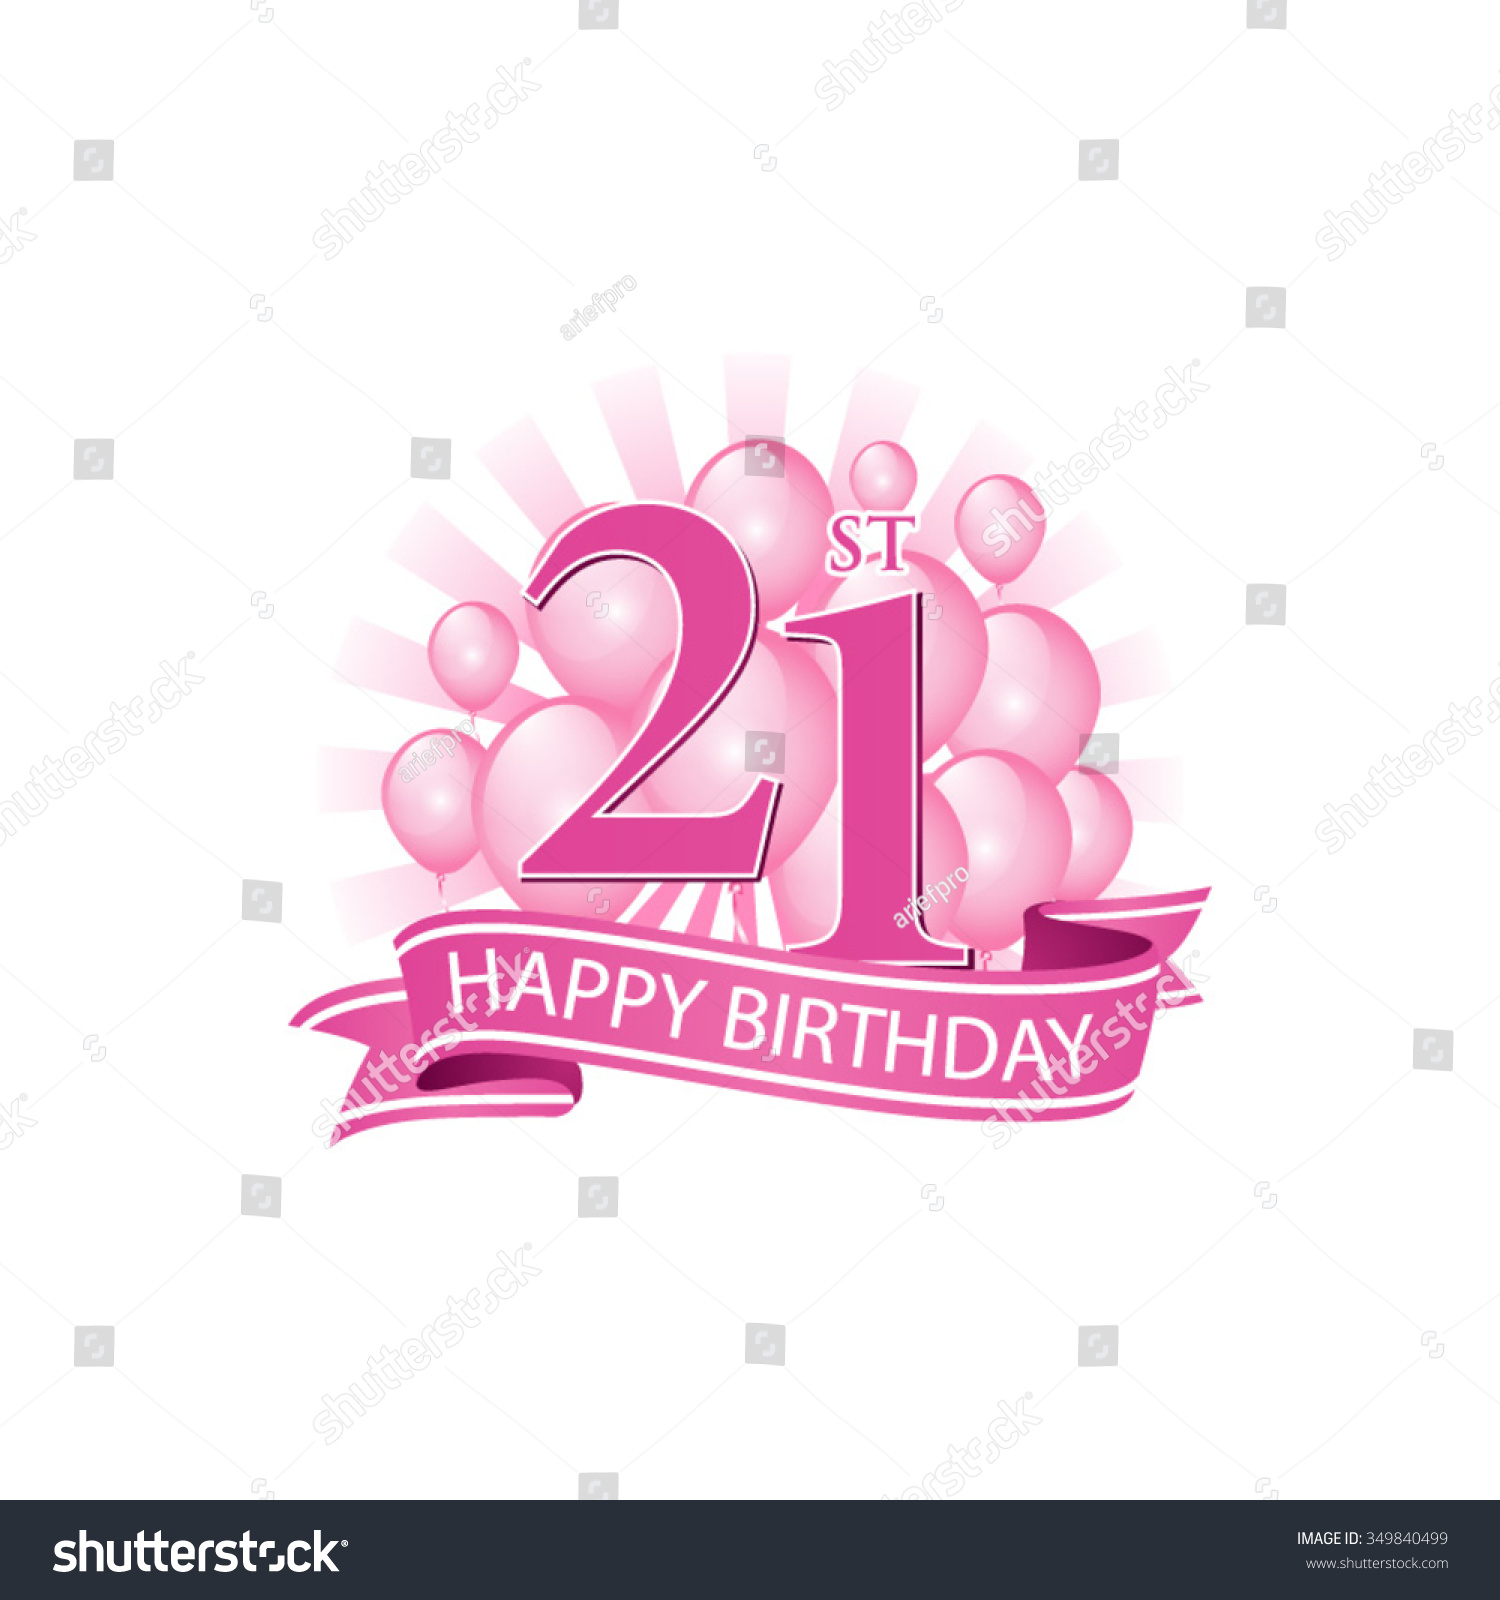 SVG of 21st pink happy birthday logo with balloons and burst of light svg